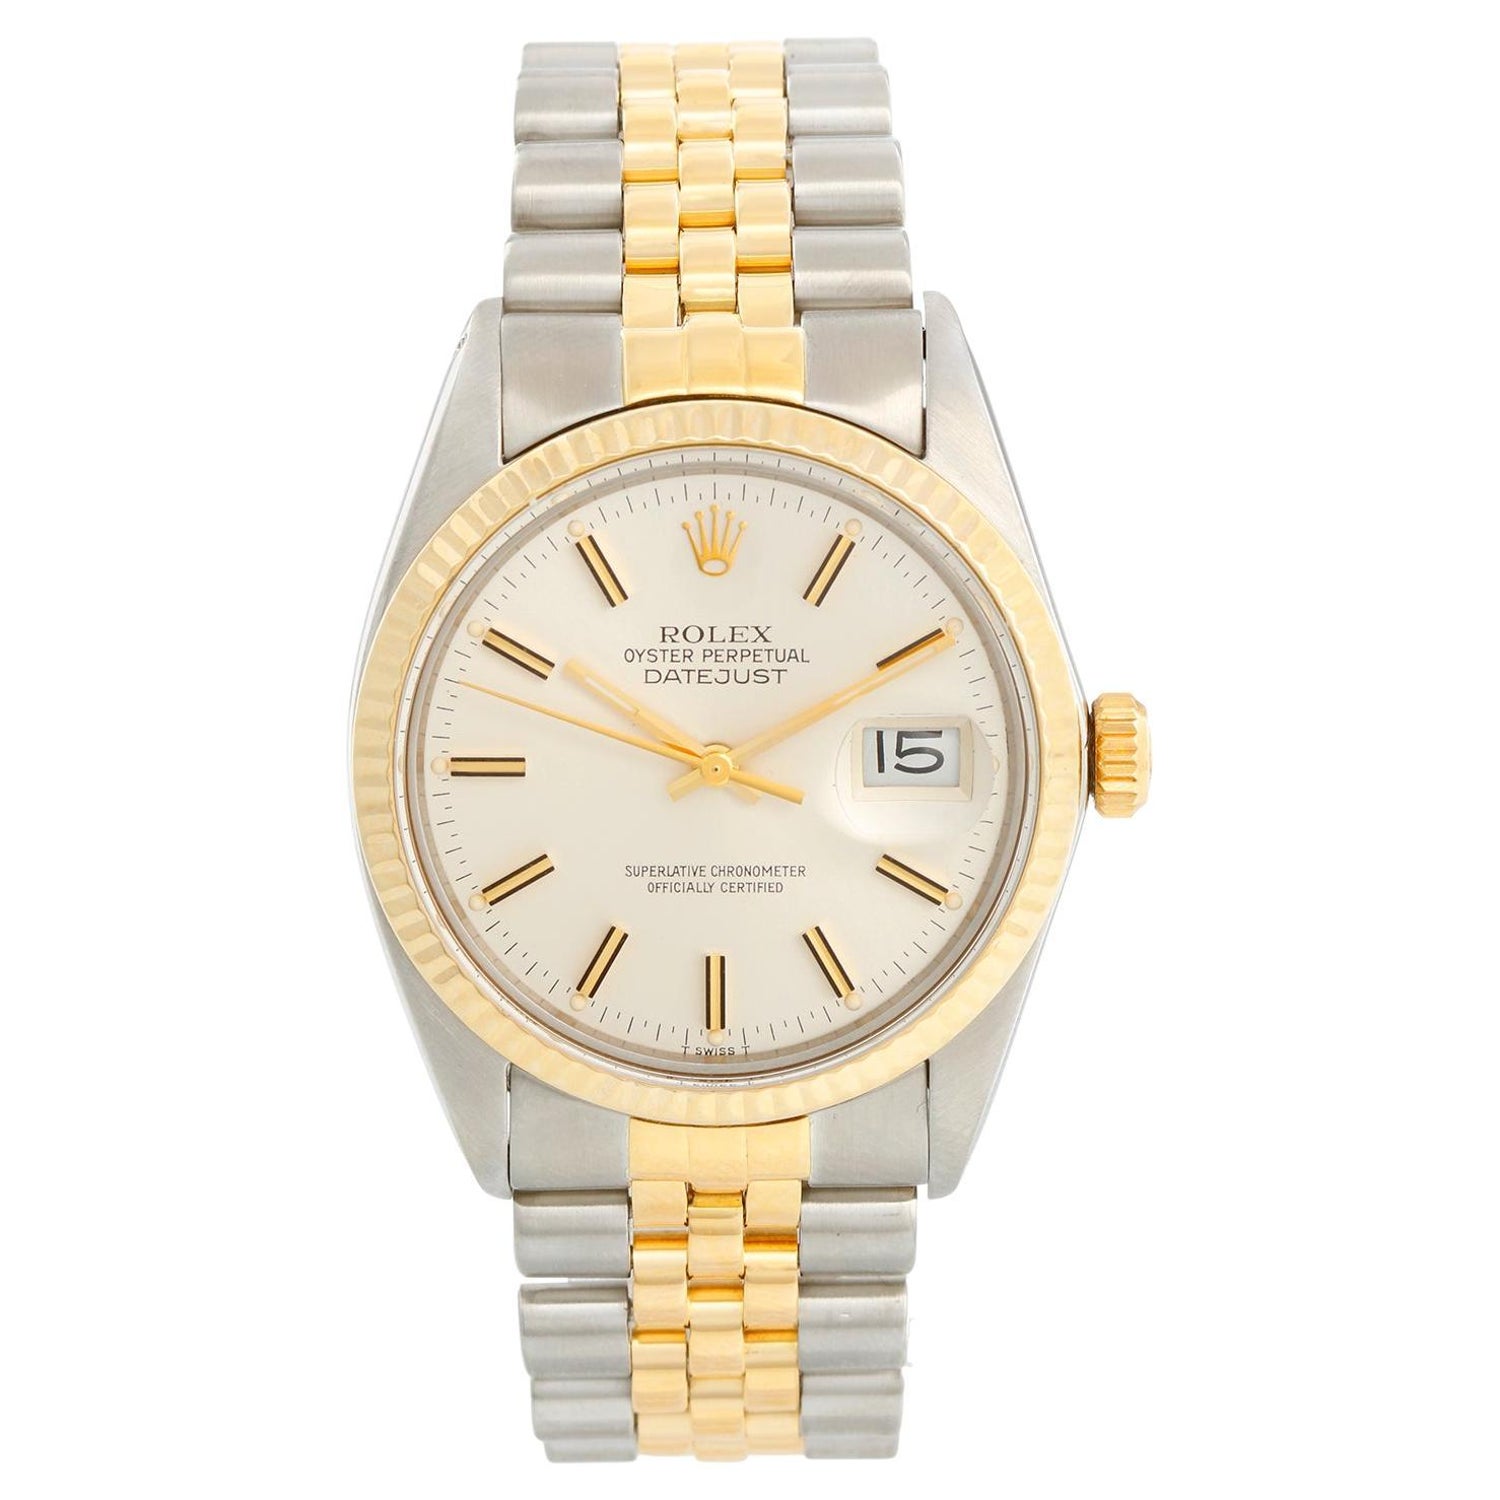 Rolex Oyster Perpetual Datejust 16013 Mens Watch For Sale at 1stDibs